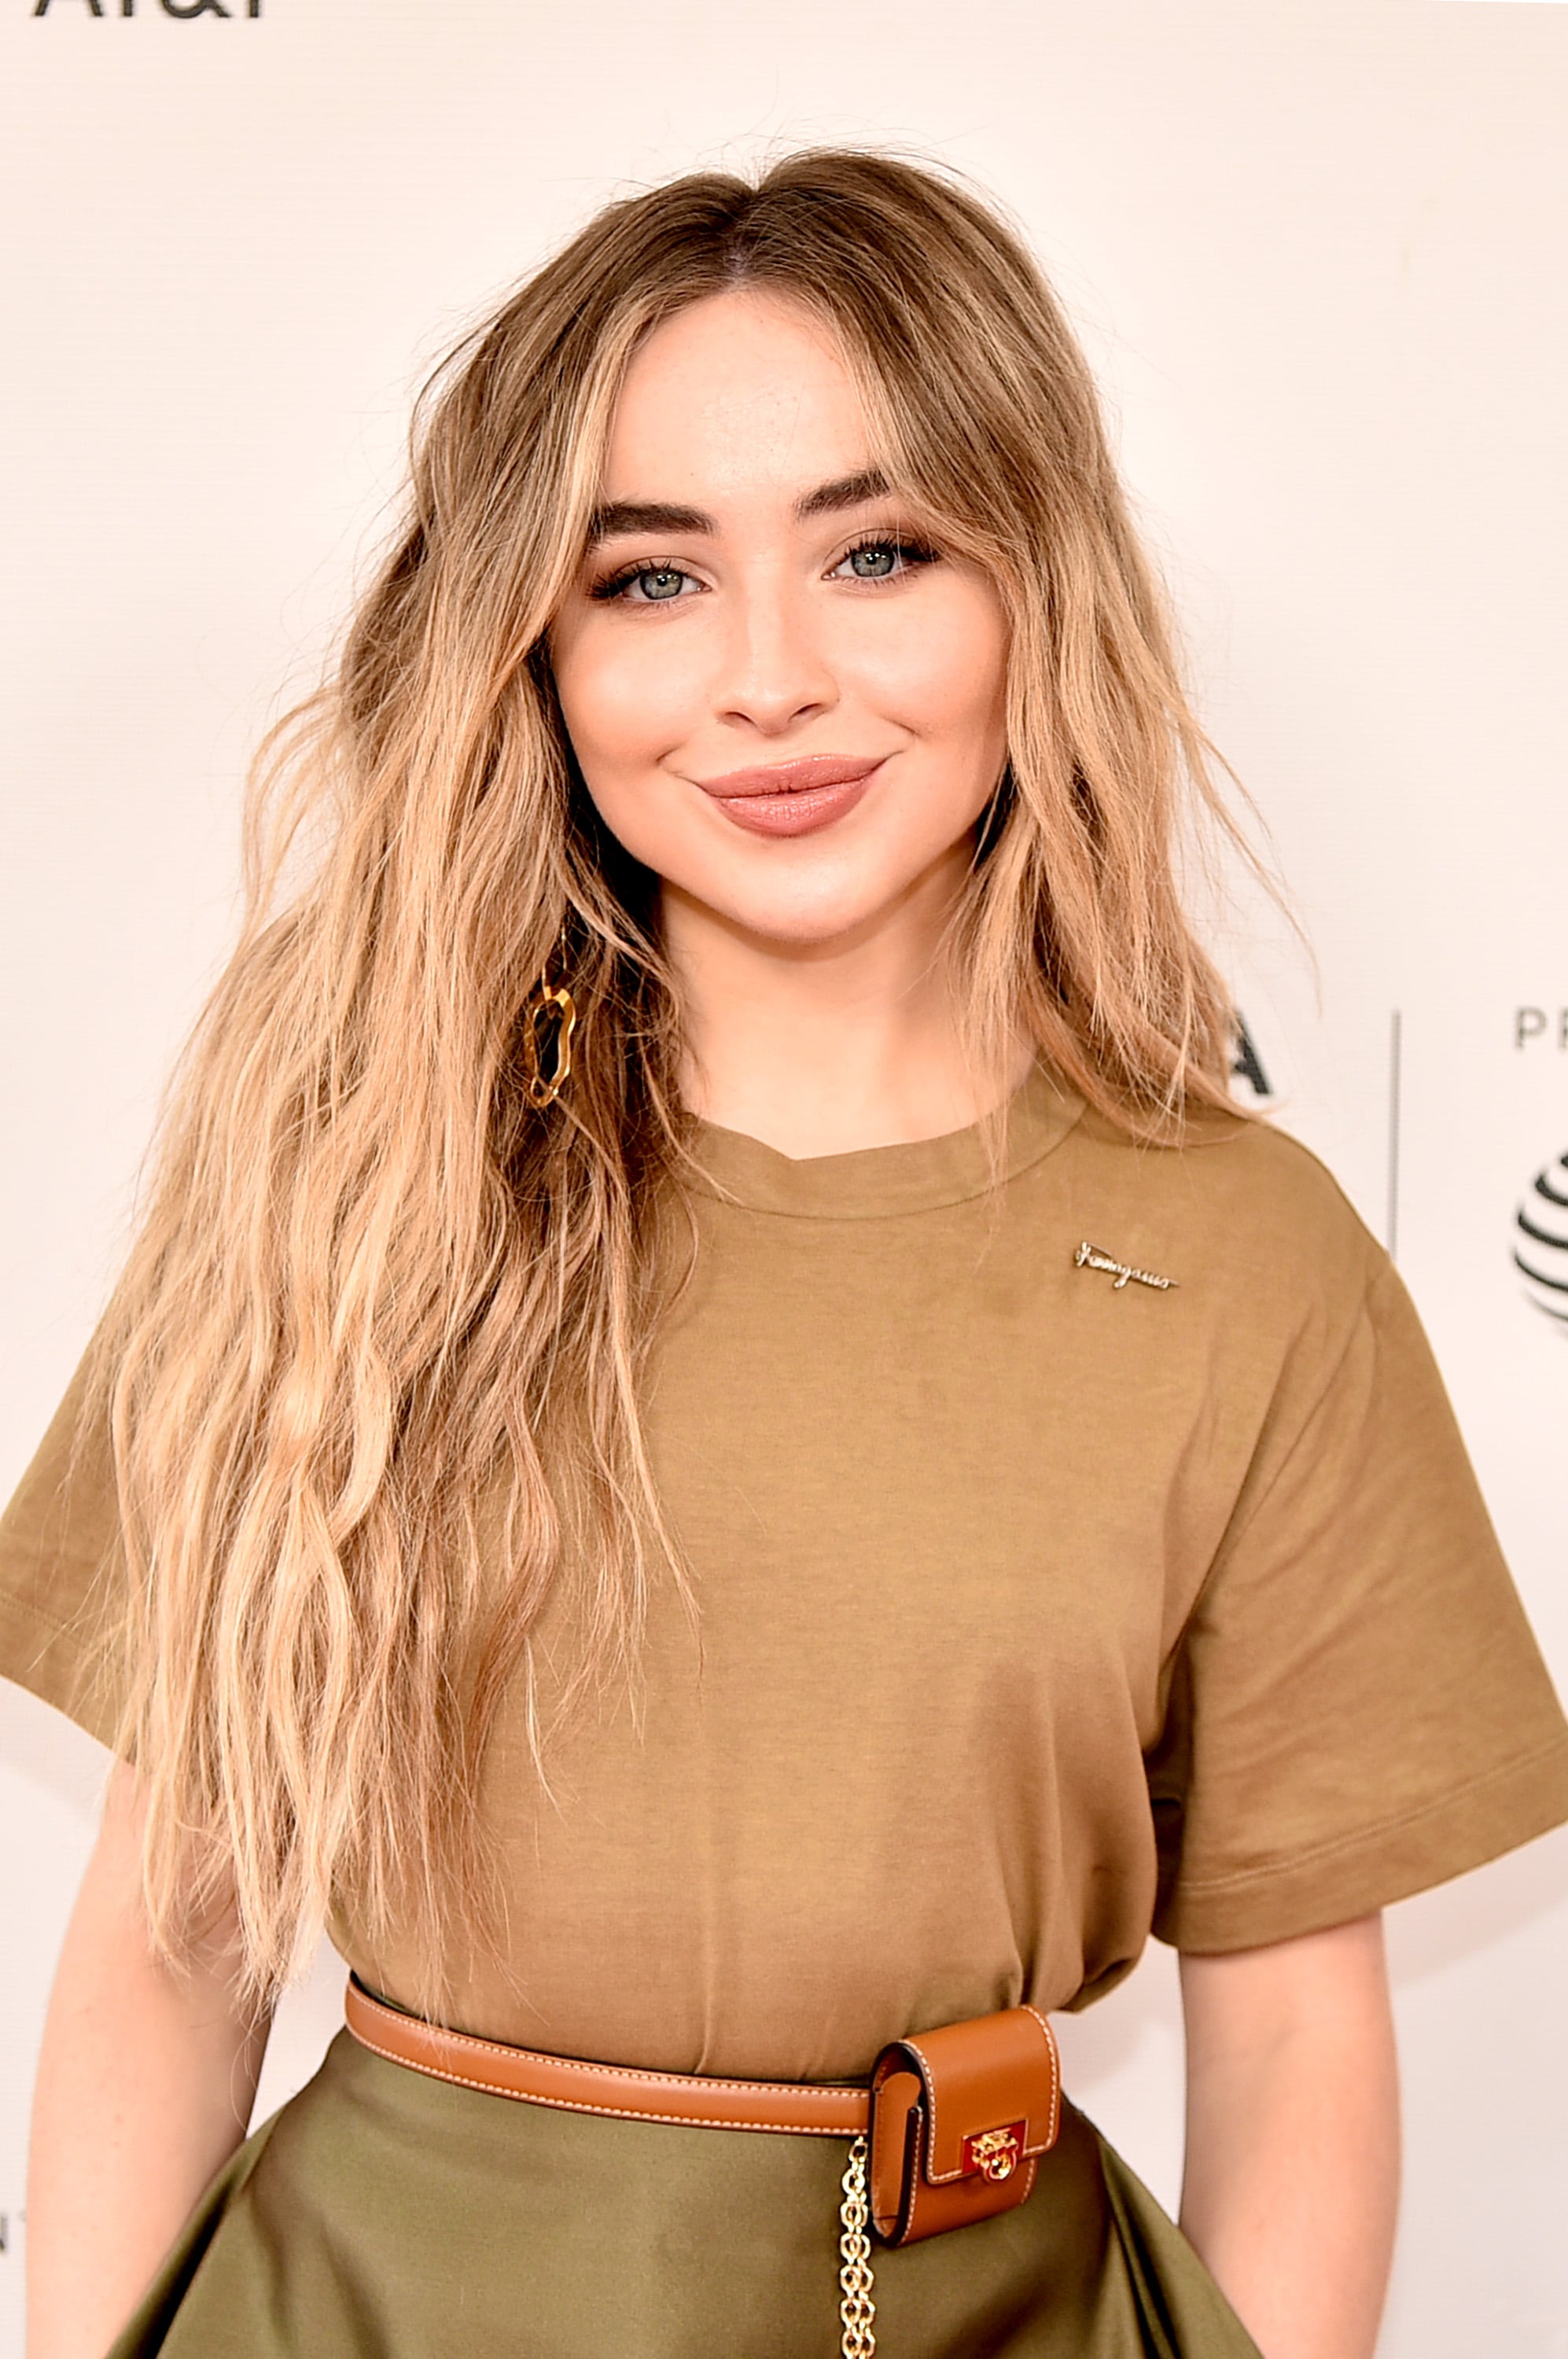 Sabrina Carpenter on Her Resilience During 'Really Dark Times' – StyleCaster